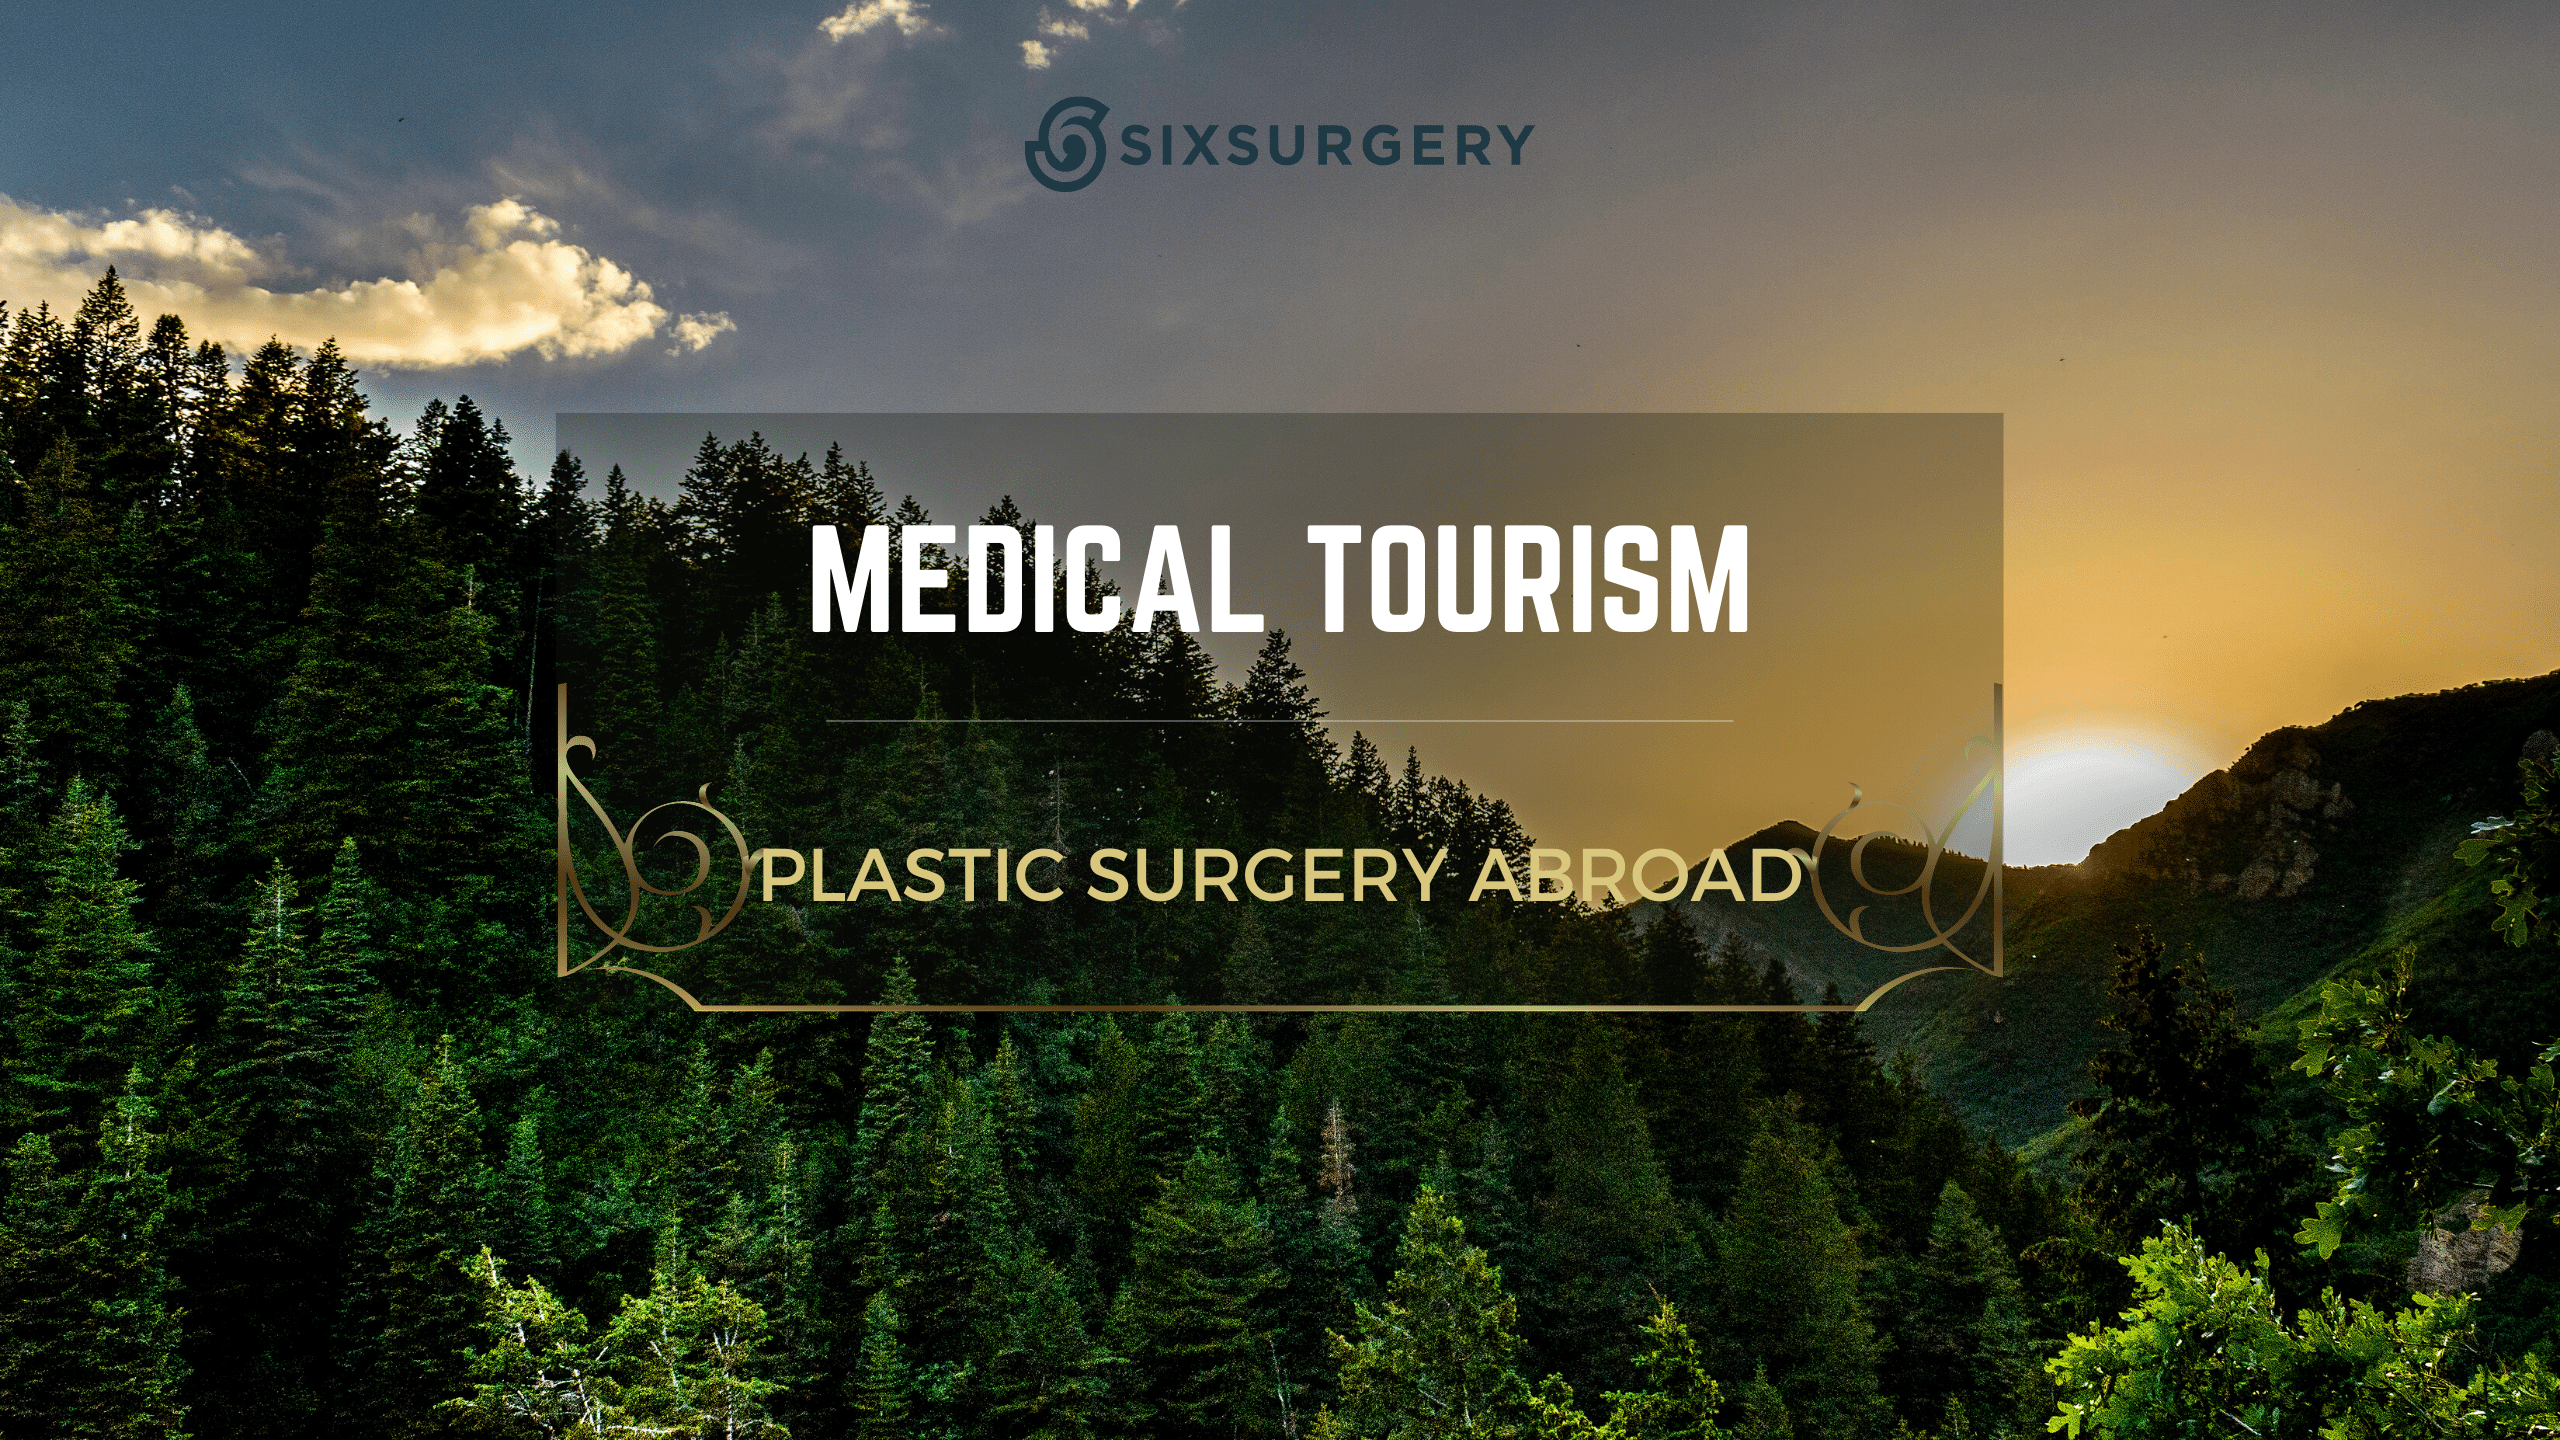 Plastic Surgery Abroad – Medical Tourism Pros & Cons